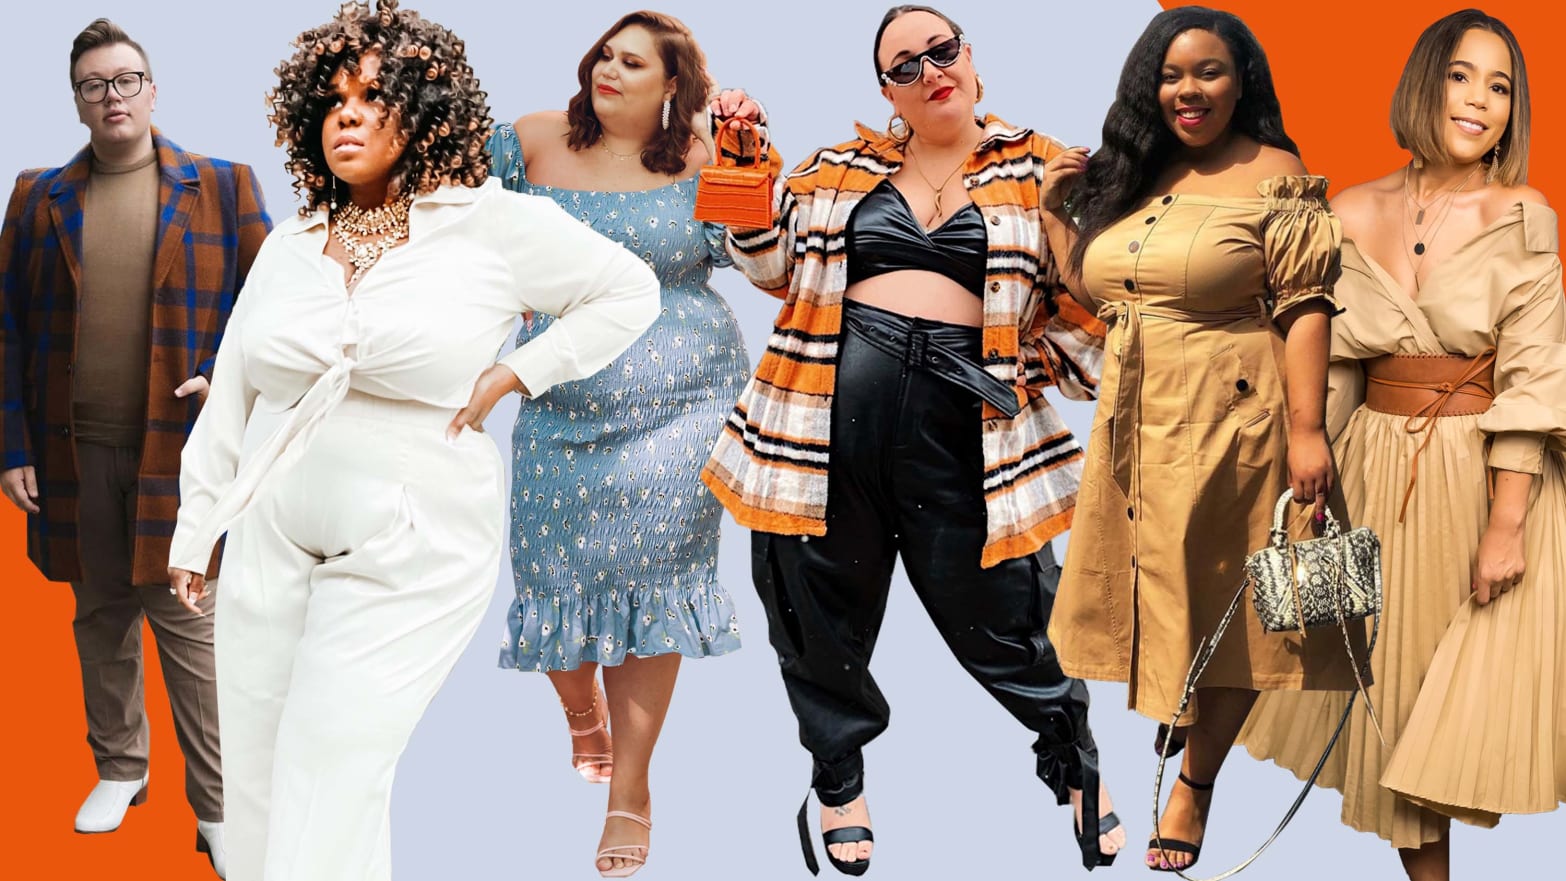 Lena Dunhams Plus-Size Fashion Line Is Another Missed Opportunity pic